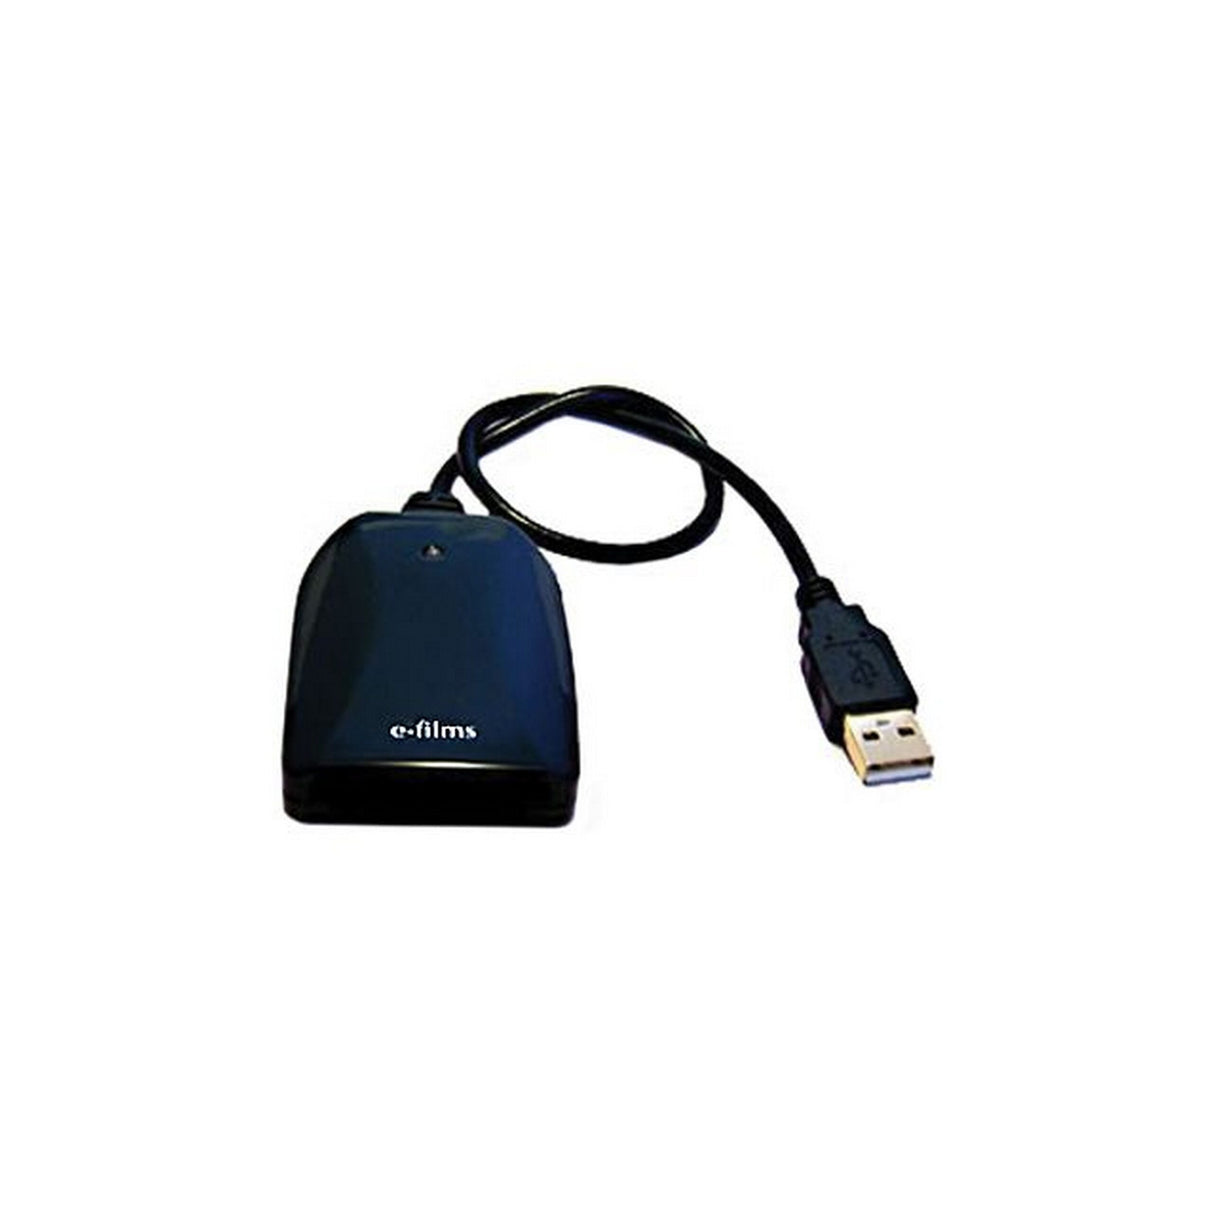 E-Films USB Adapter for MxR and E-LCR Card Readers